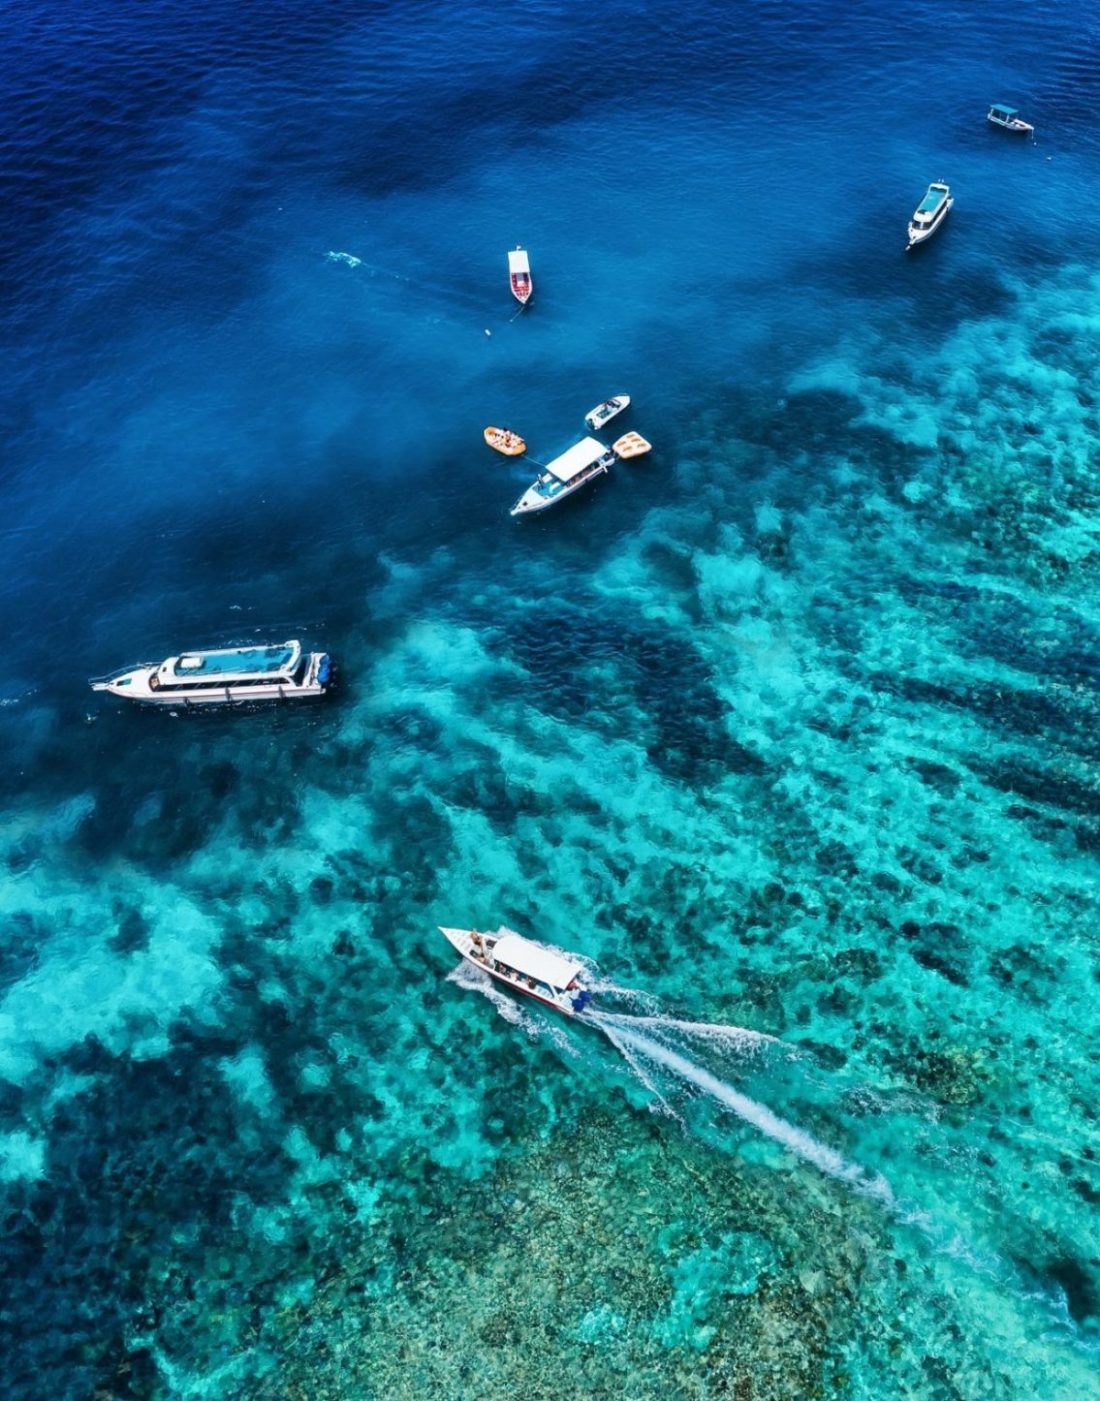 The view from the air on boats near the shore. Bali Island, Indonesia